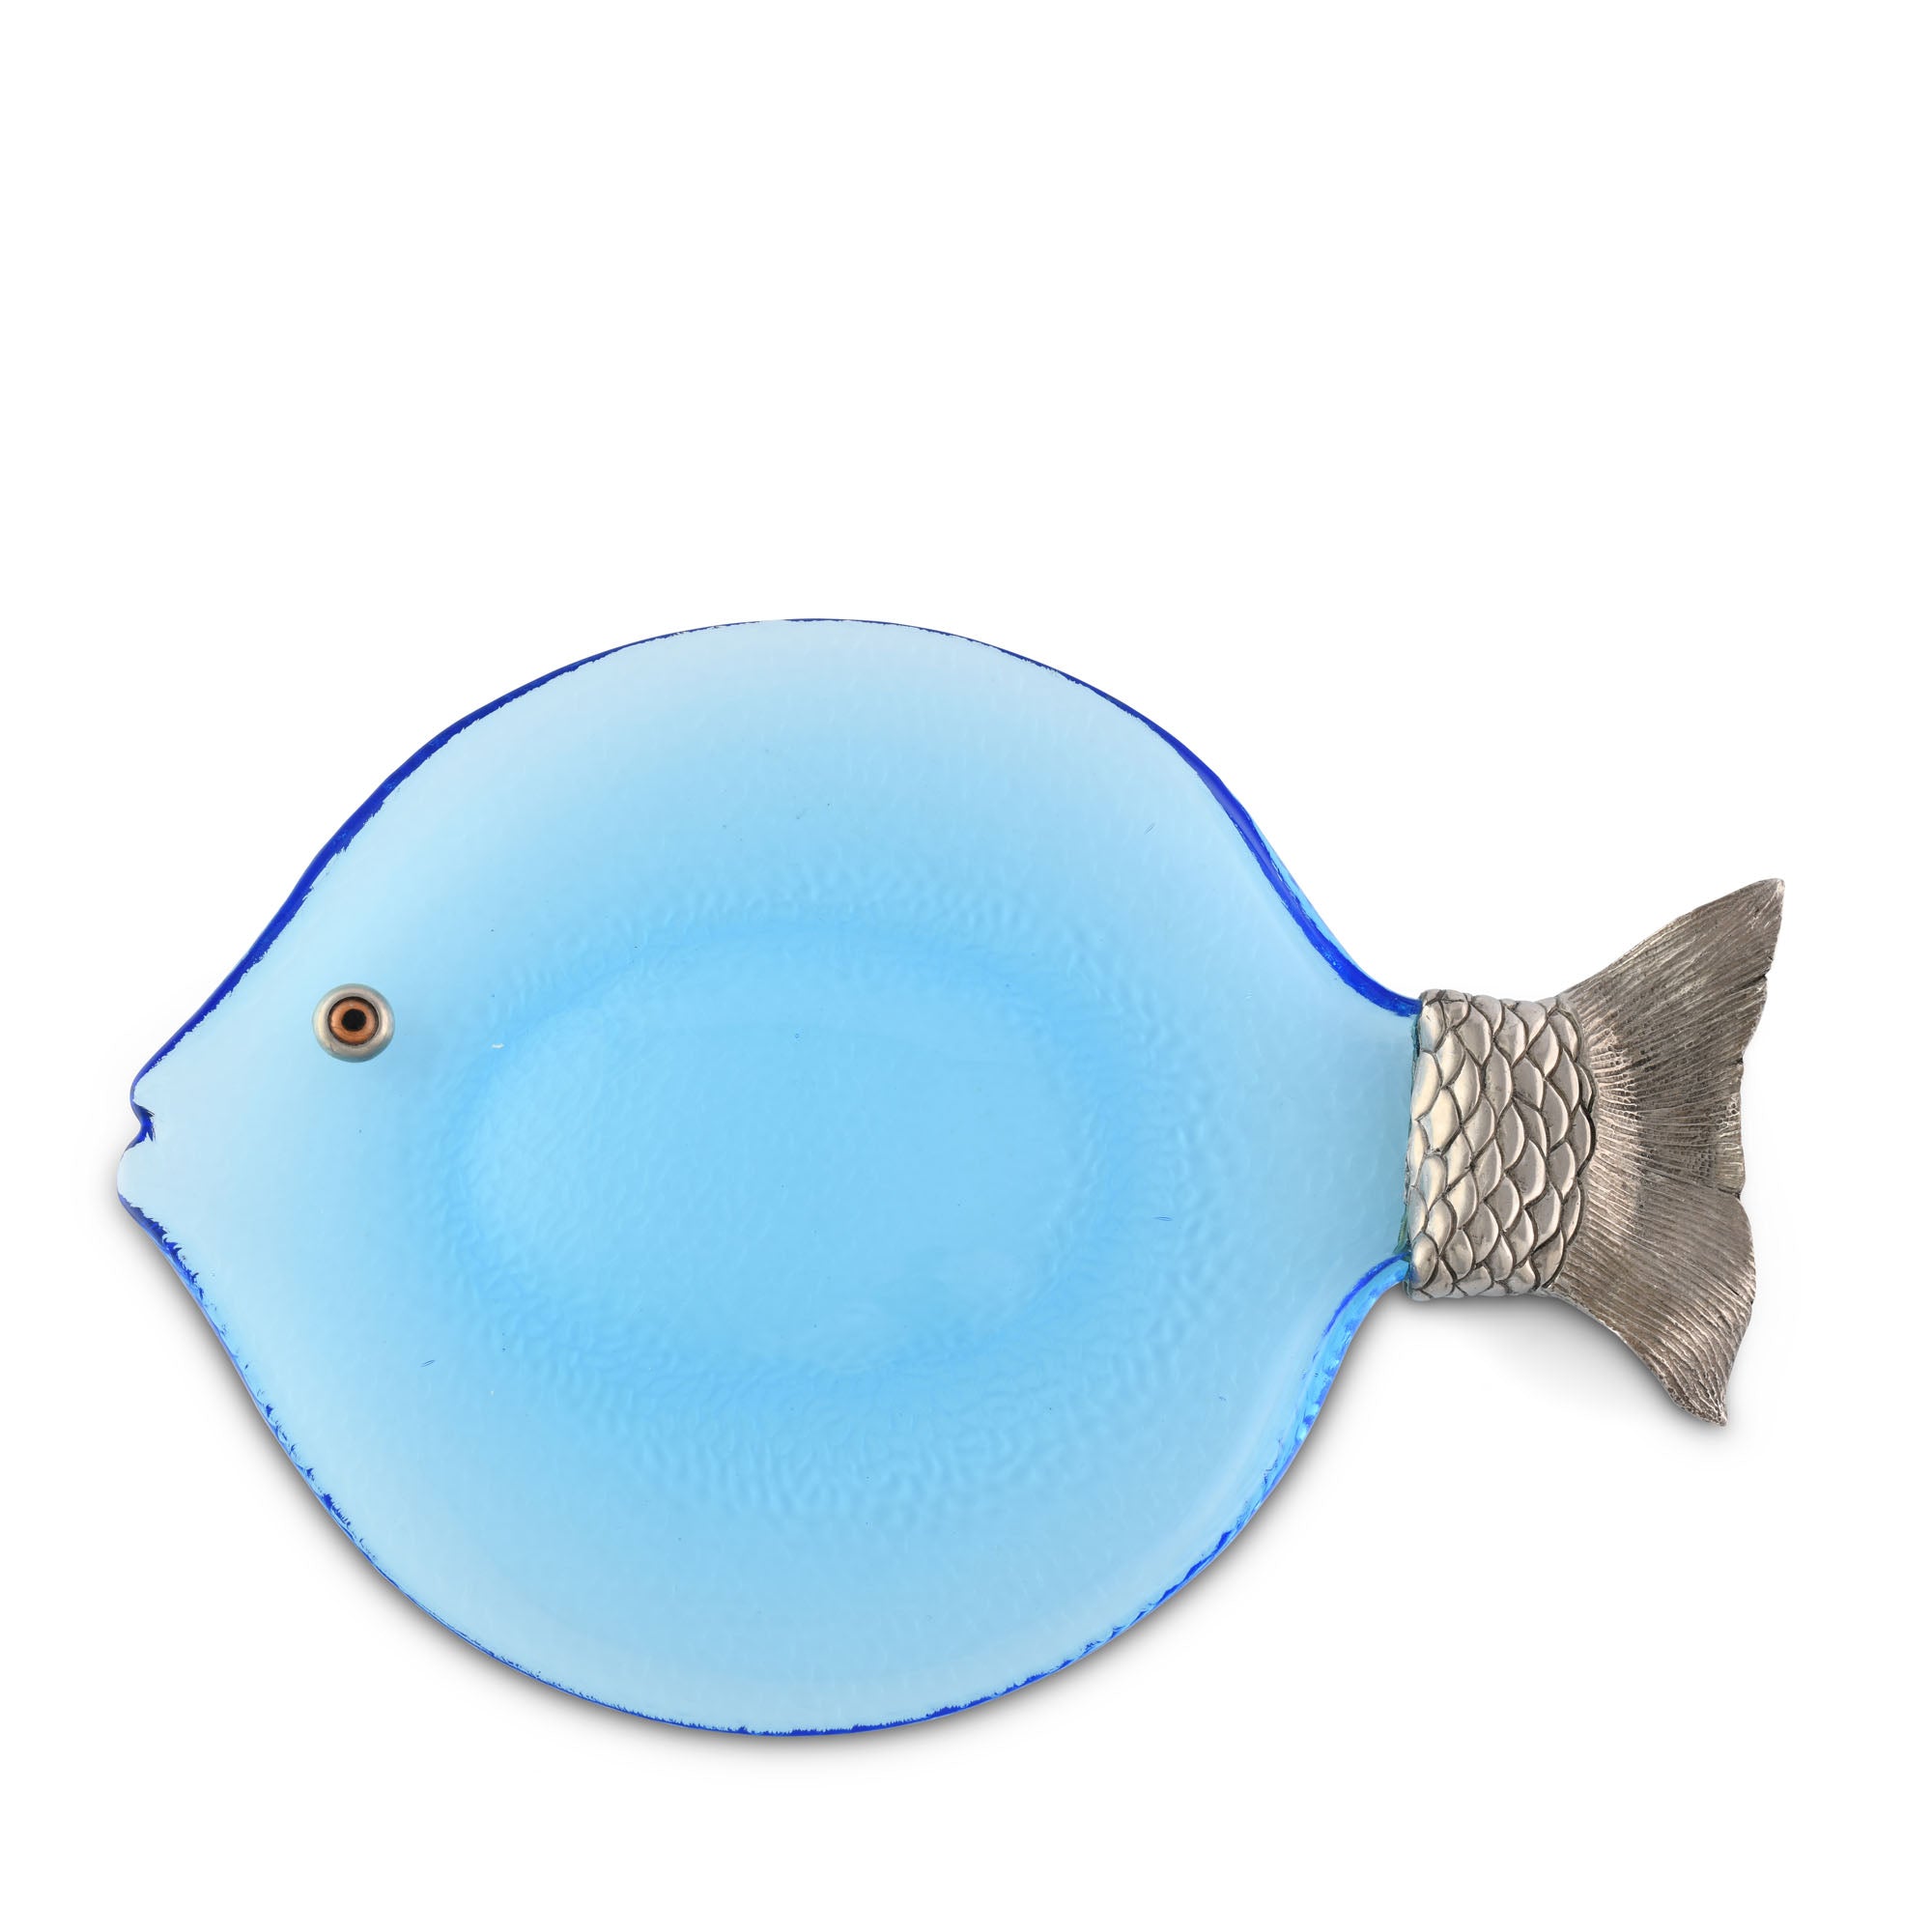 Vagabond House Ocean Fish Glass Tray Product Image